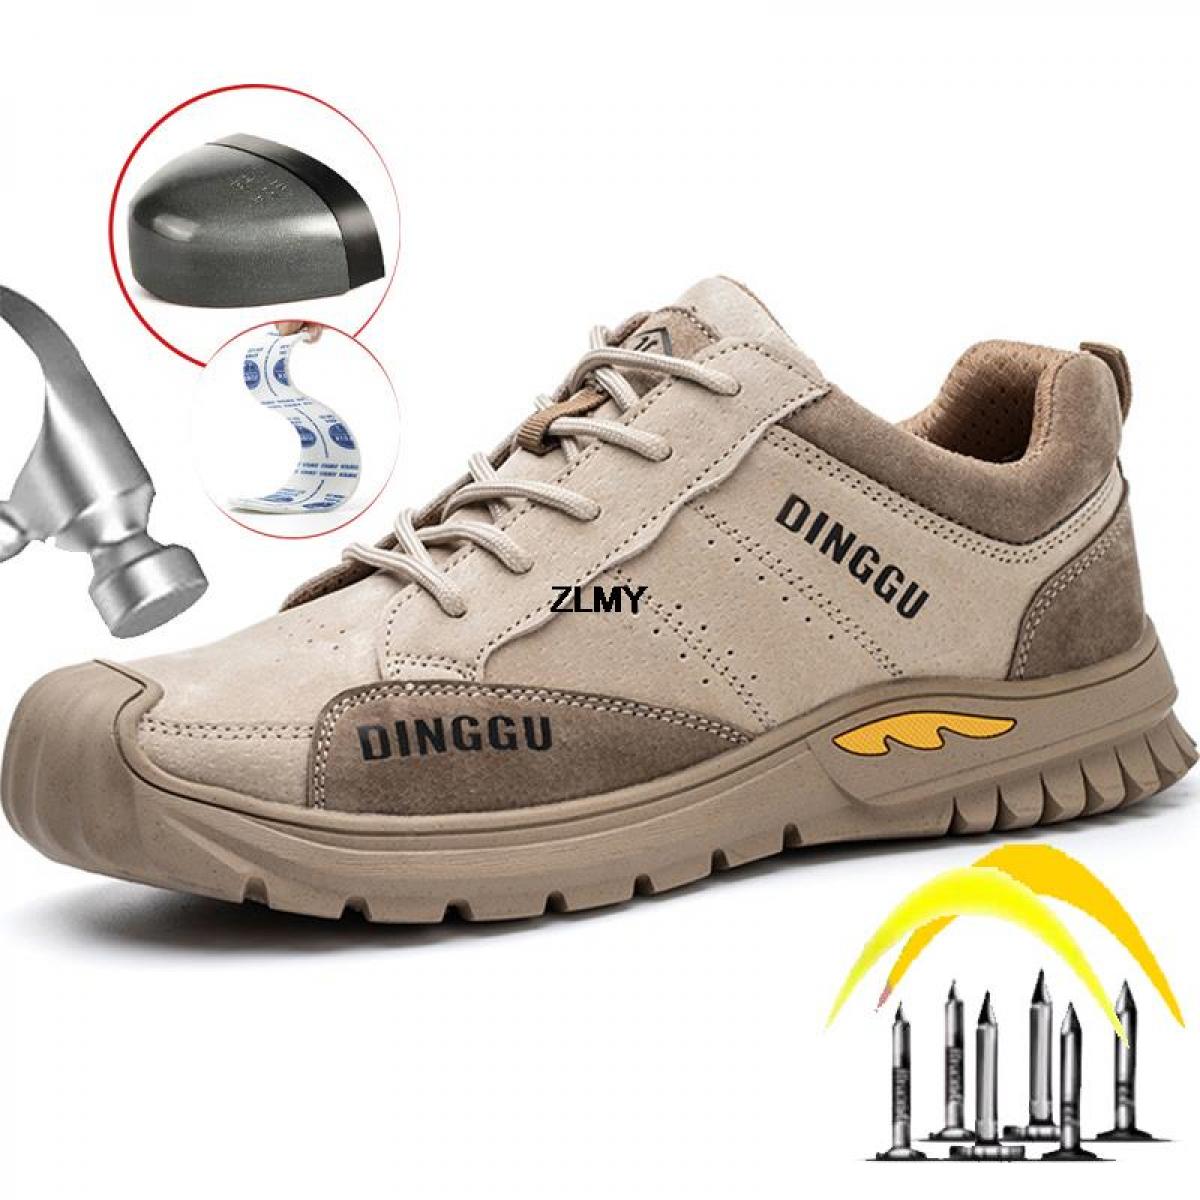 Wear Resistant Men Safety Shoes Anti Crash Anti Stab Work Safety Boots Man Construction Work Sneaker Comfort Protective 